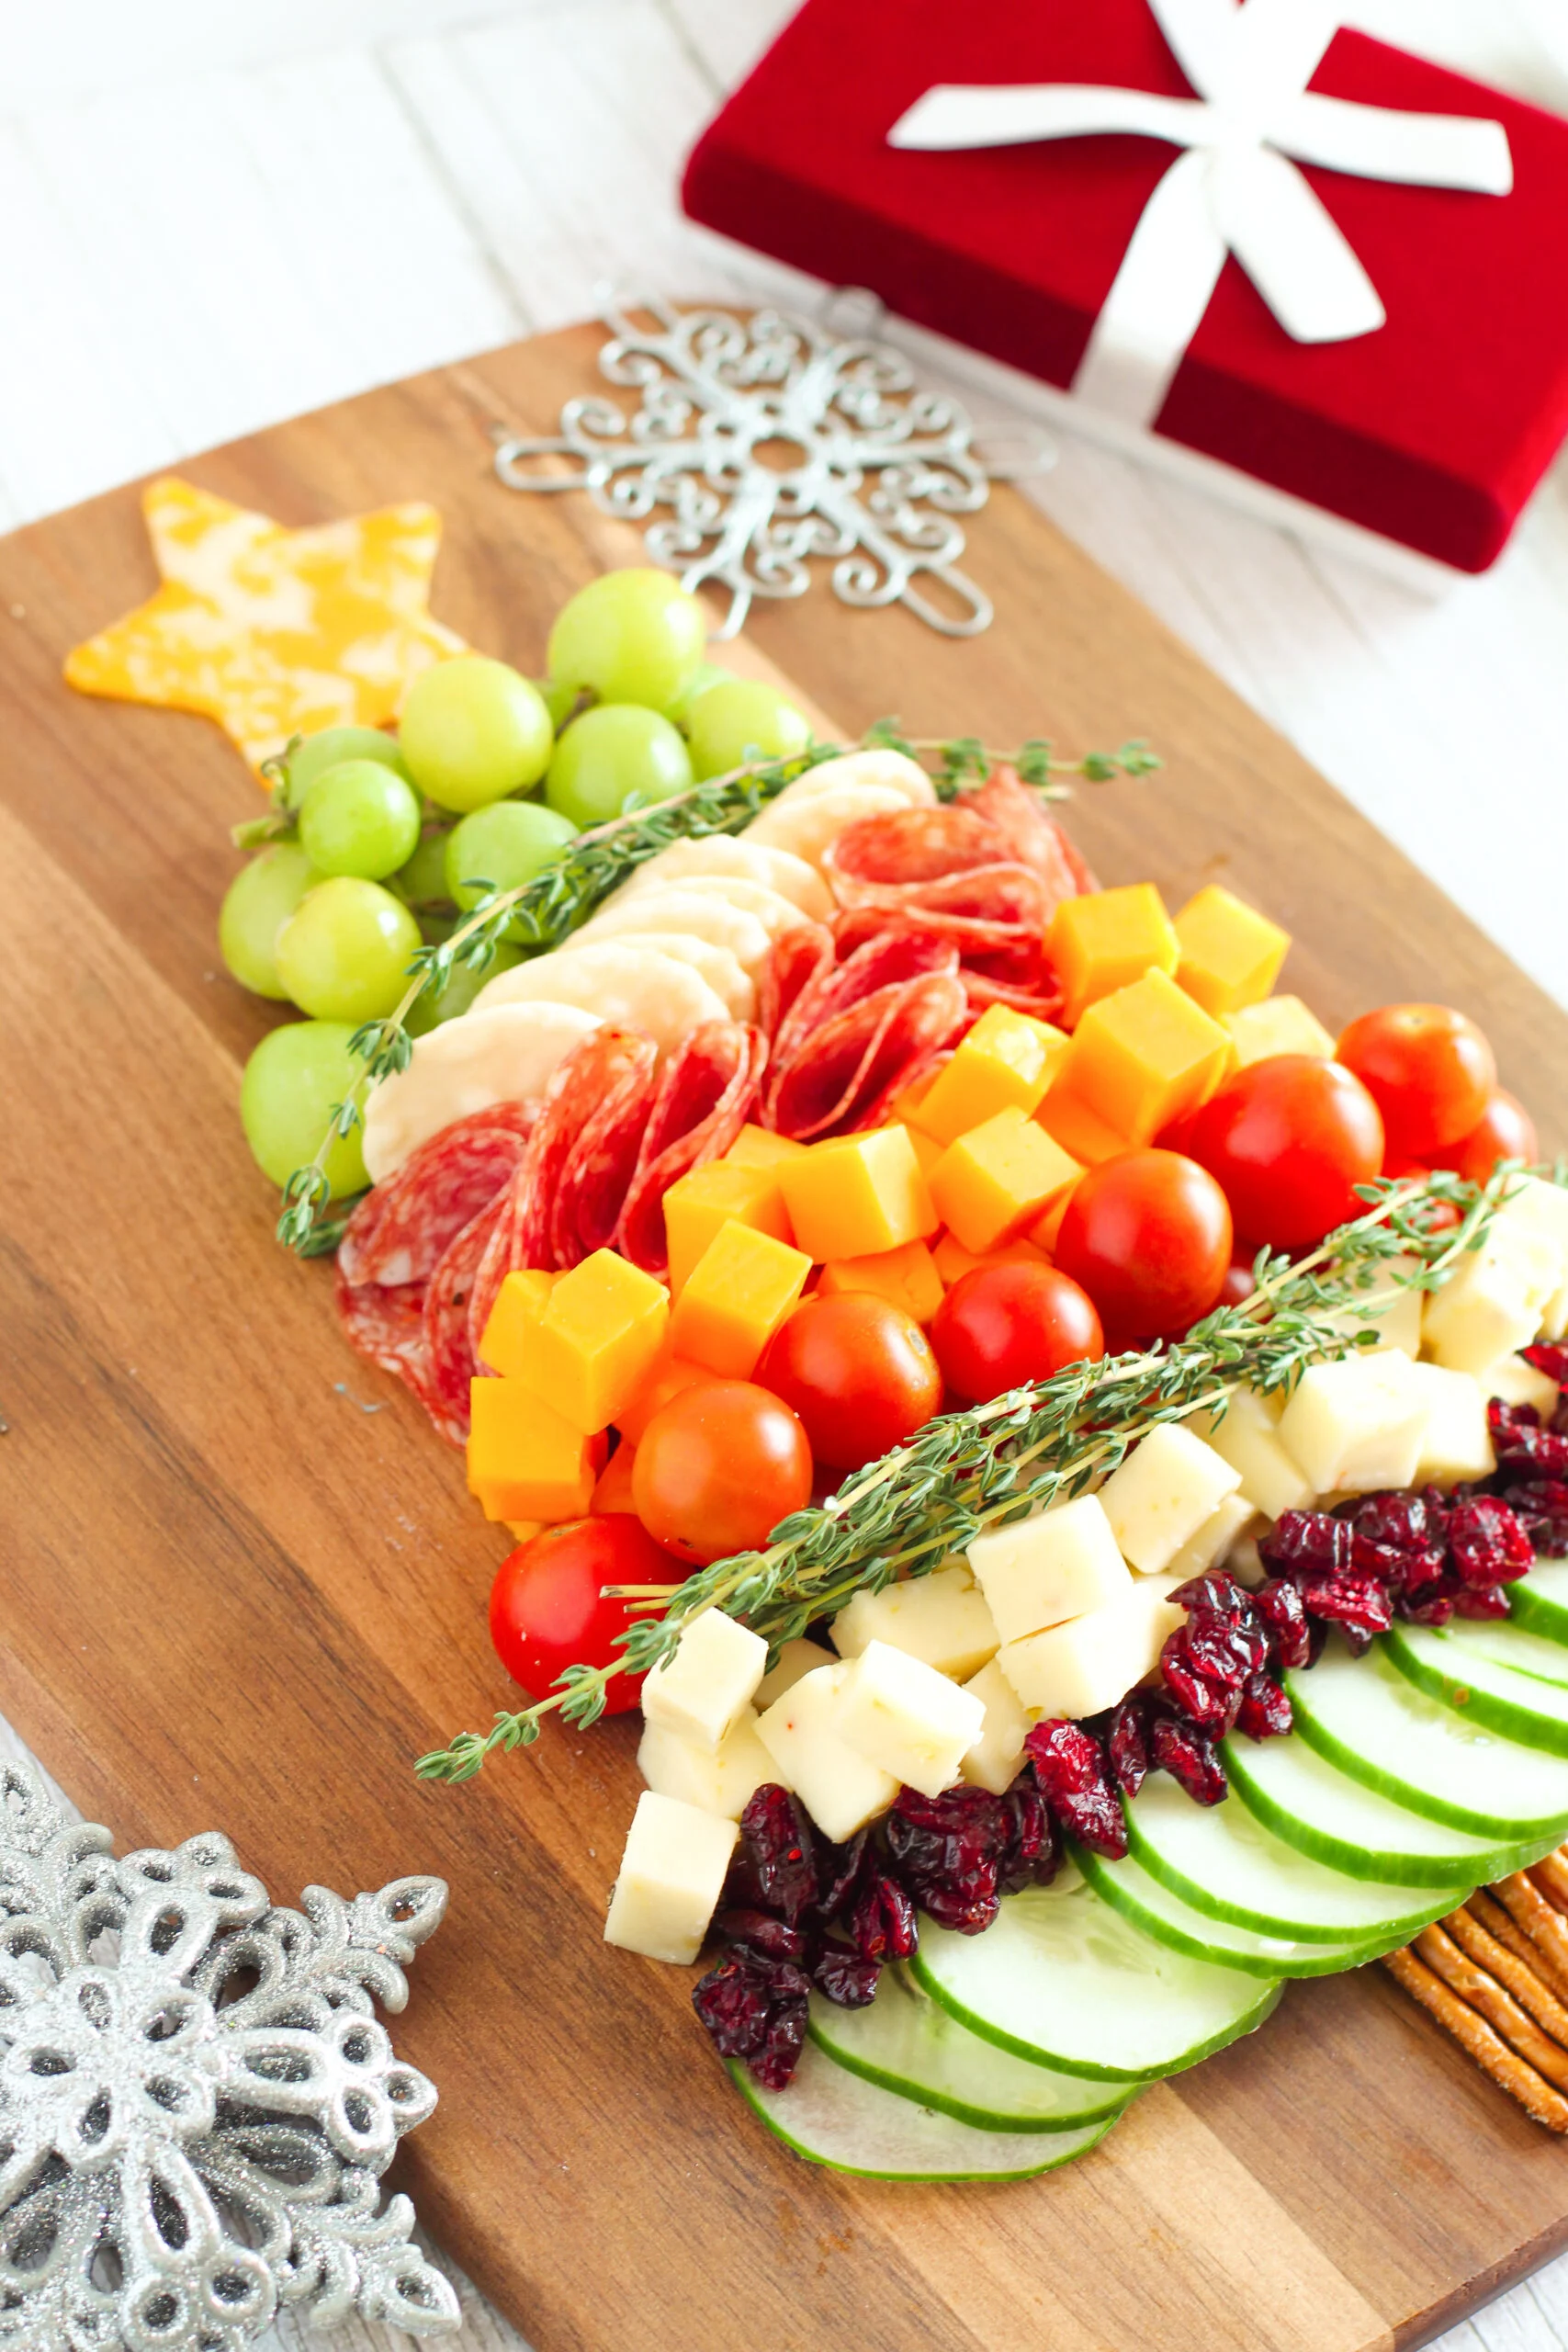 festive christmas tree appetizer with layers of grapes, cheeses, meats, cherry tomatoes.